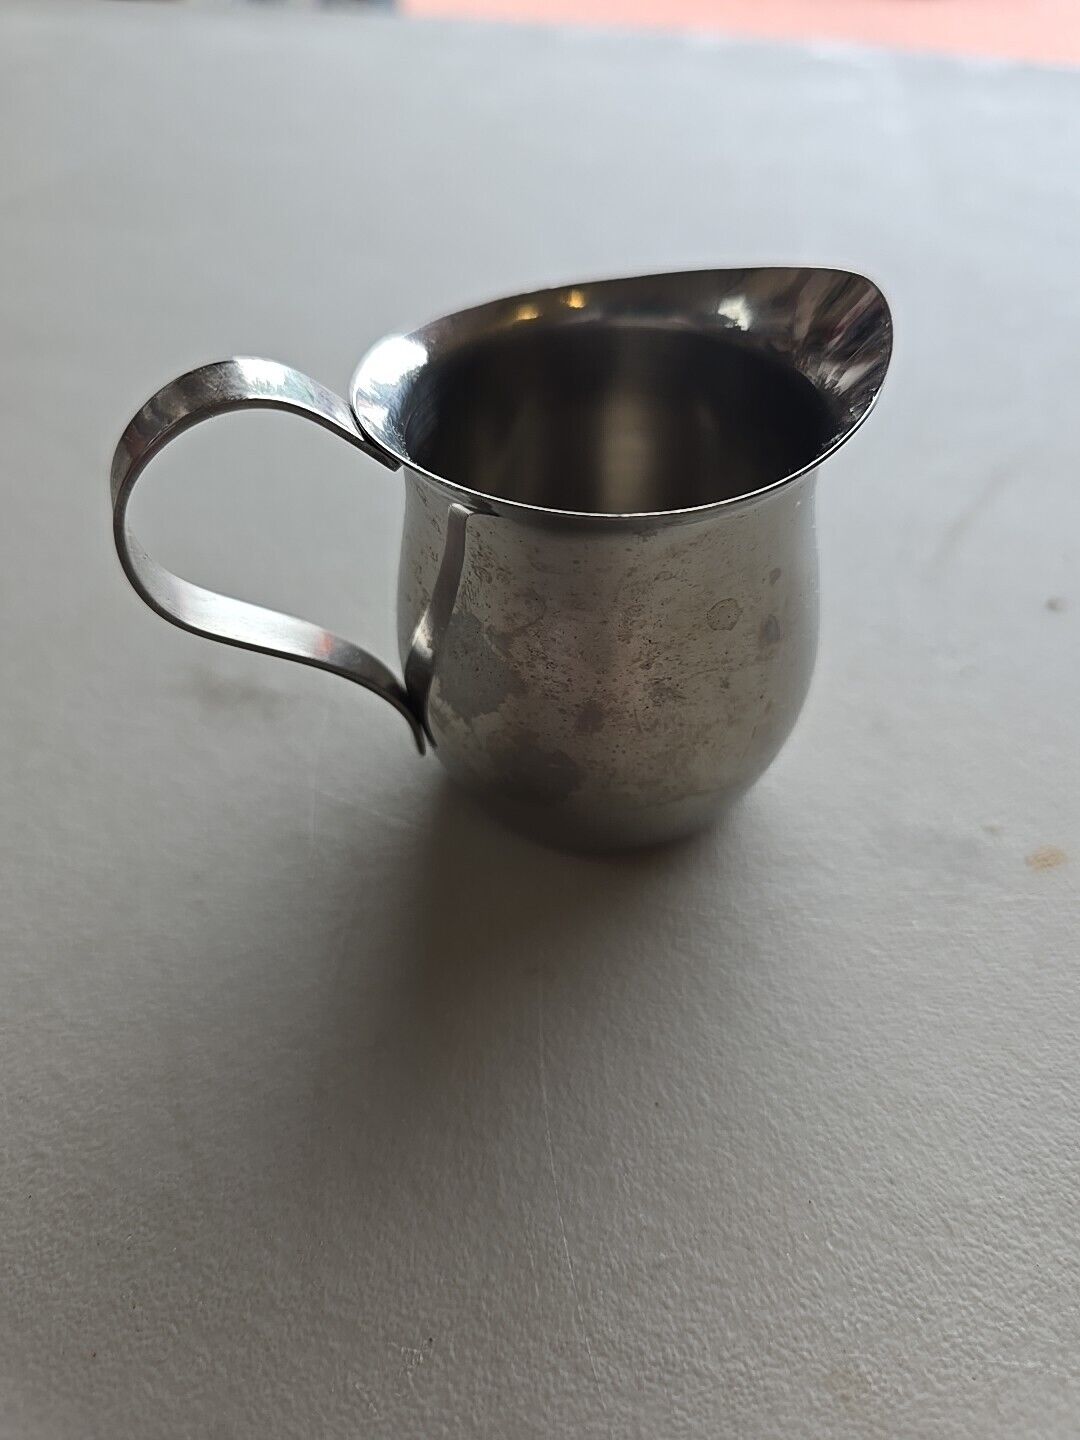 Vintage Brandware Stainless Steel Creamer  No. 18-8- Made in China